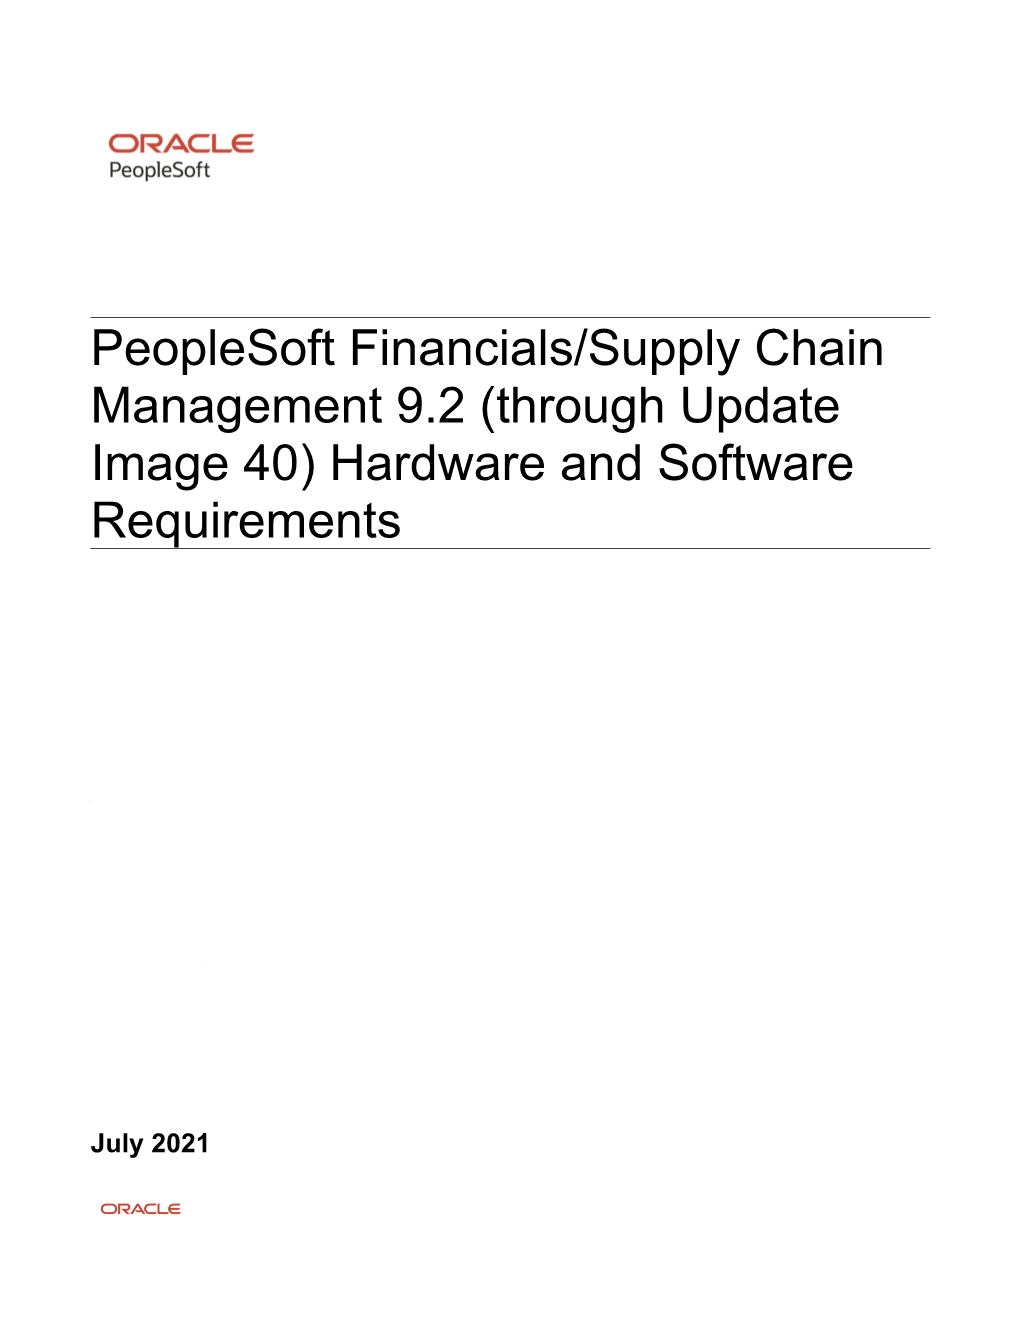 Peoplesoft Financials/Supply Chain Management 9.2 (Through Update Image 40) Hardware and Software Requirements